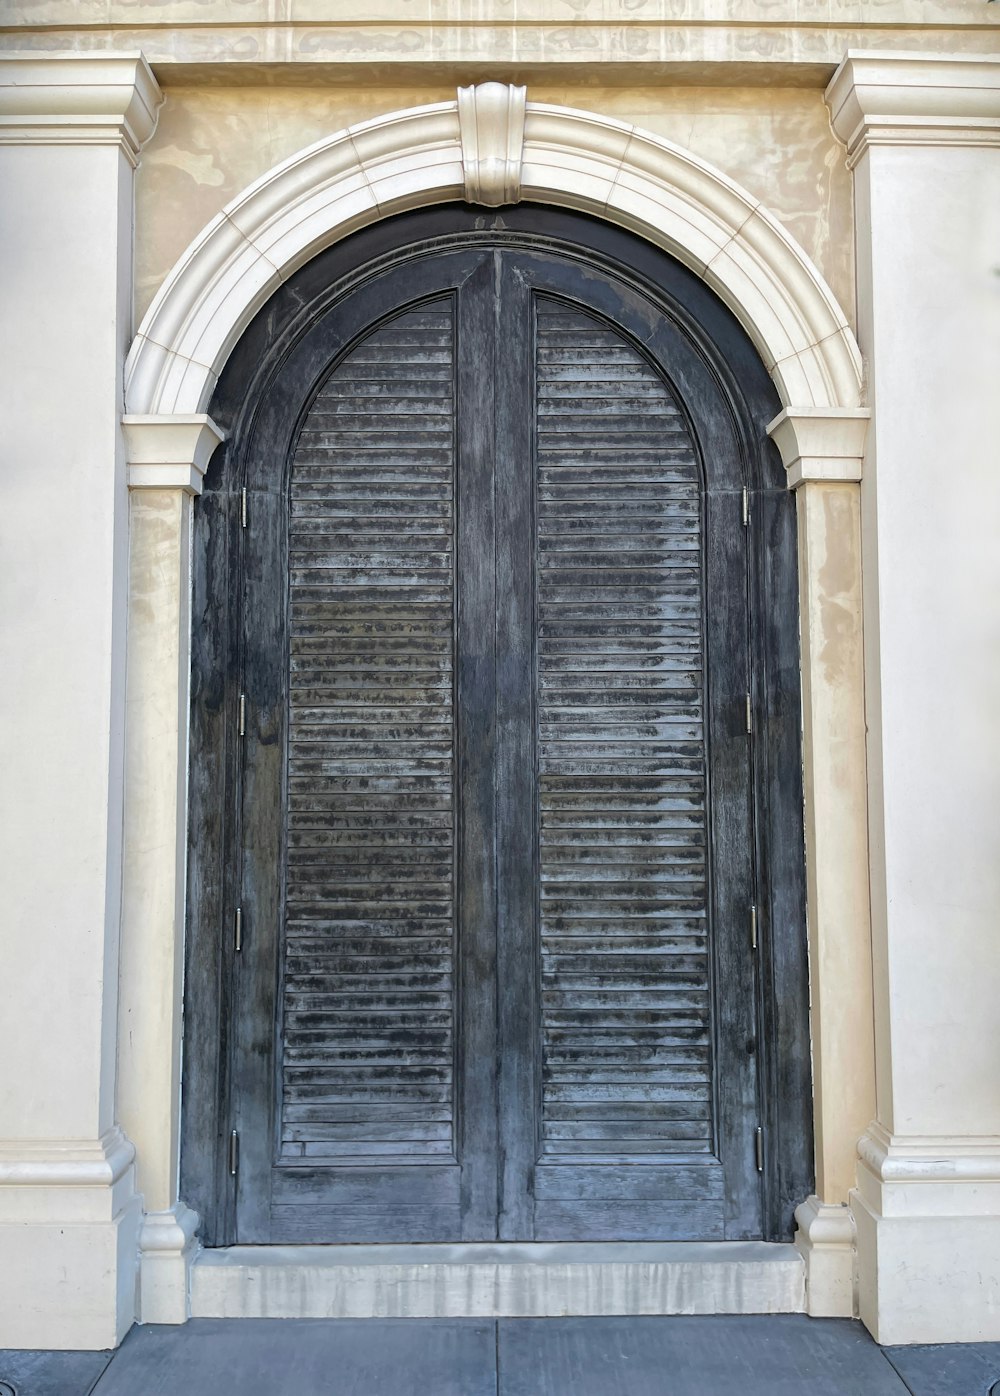 a large wooden door with a decorative arch above it